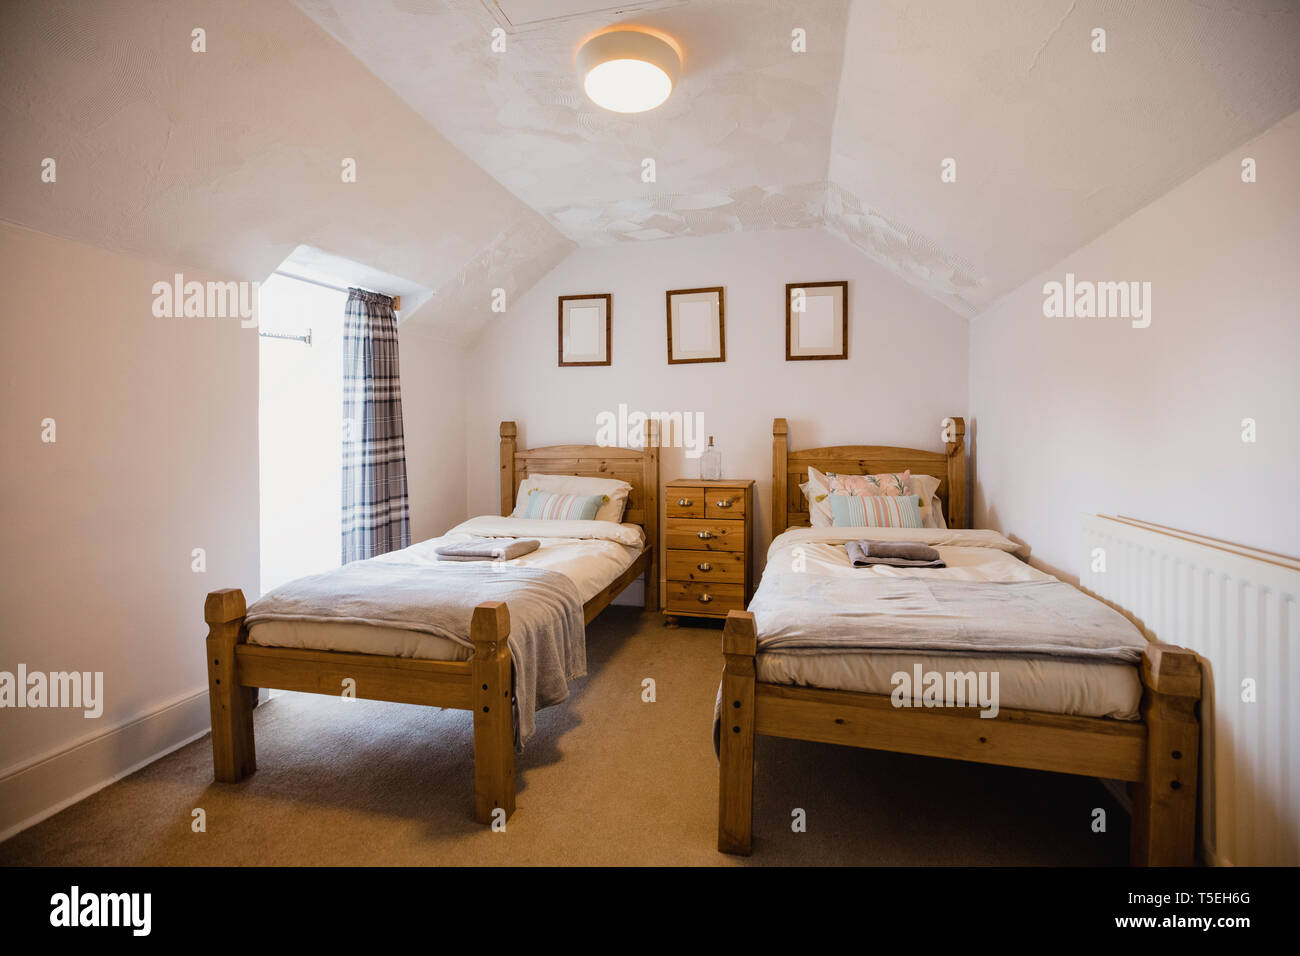 Interior shot of a empty bedroom. There are two single wooden beds against a wall with a set of drawers between them. Stock Photo